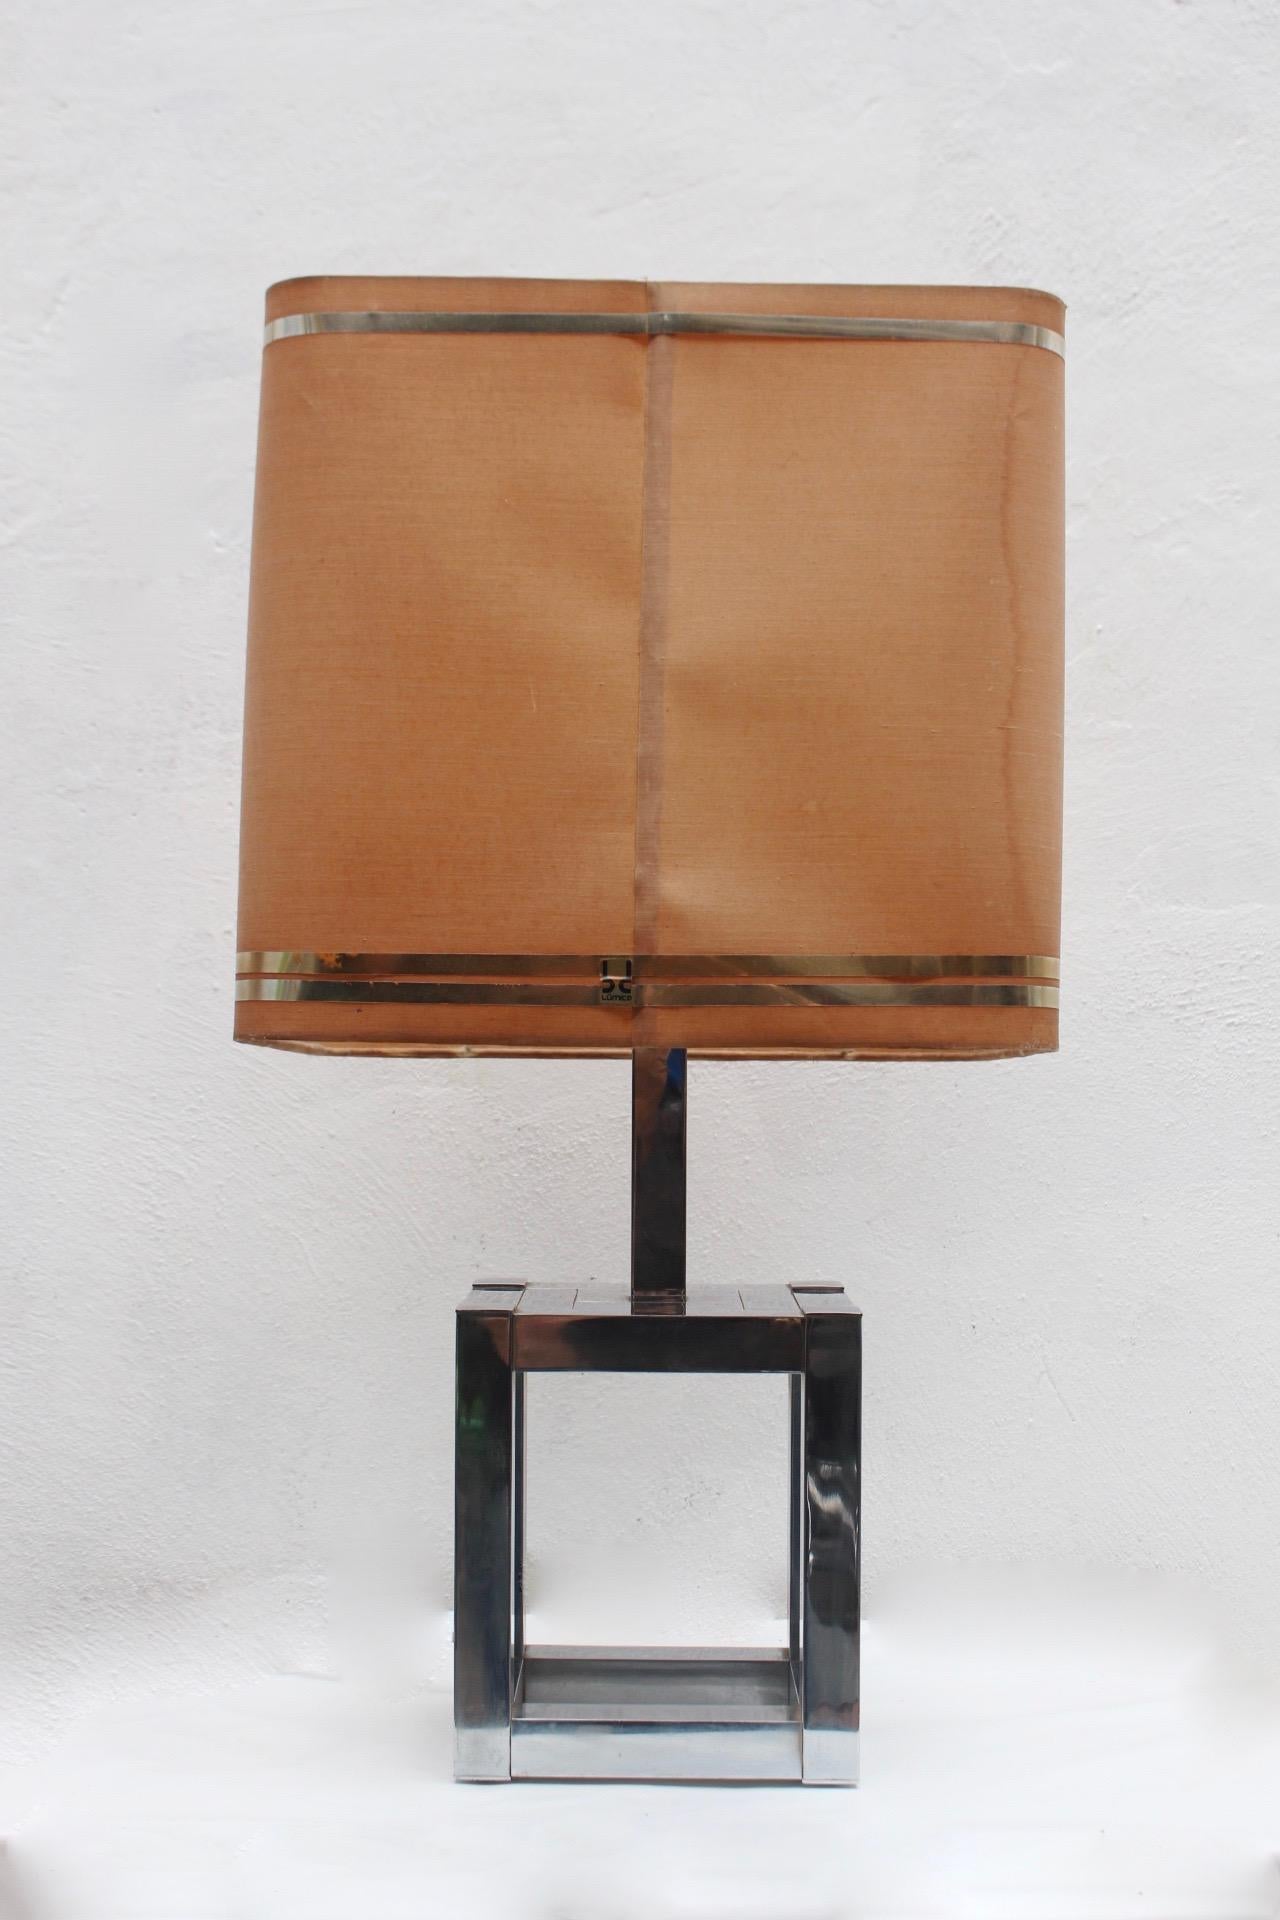 Midcentury sculptural chromed cubic table lamp designed by Willy Rizzo for Lumica, Italy, 1970s.
Original switch. Original shade in fair condition.